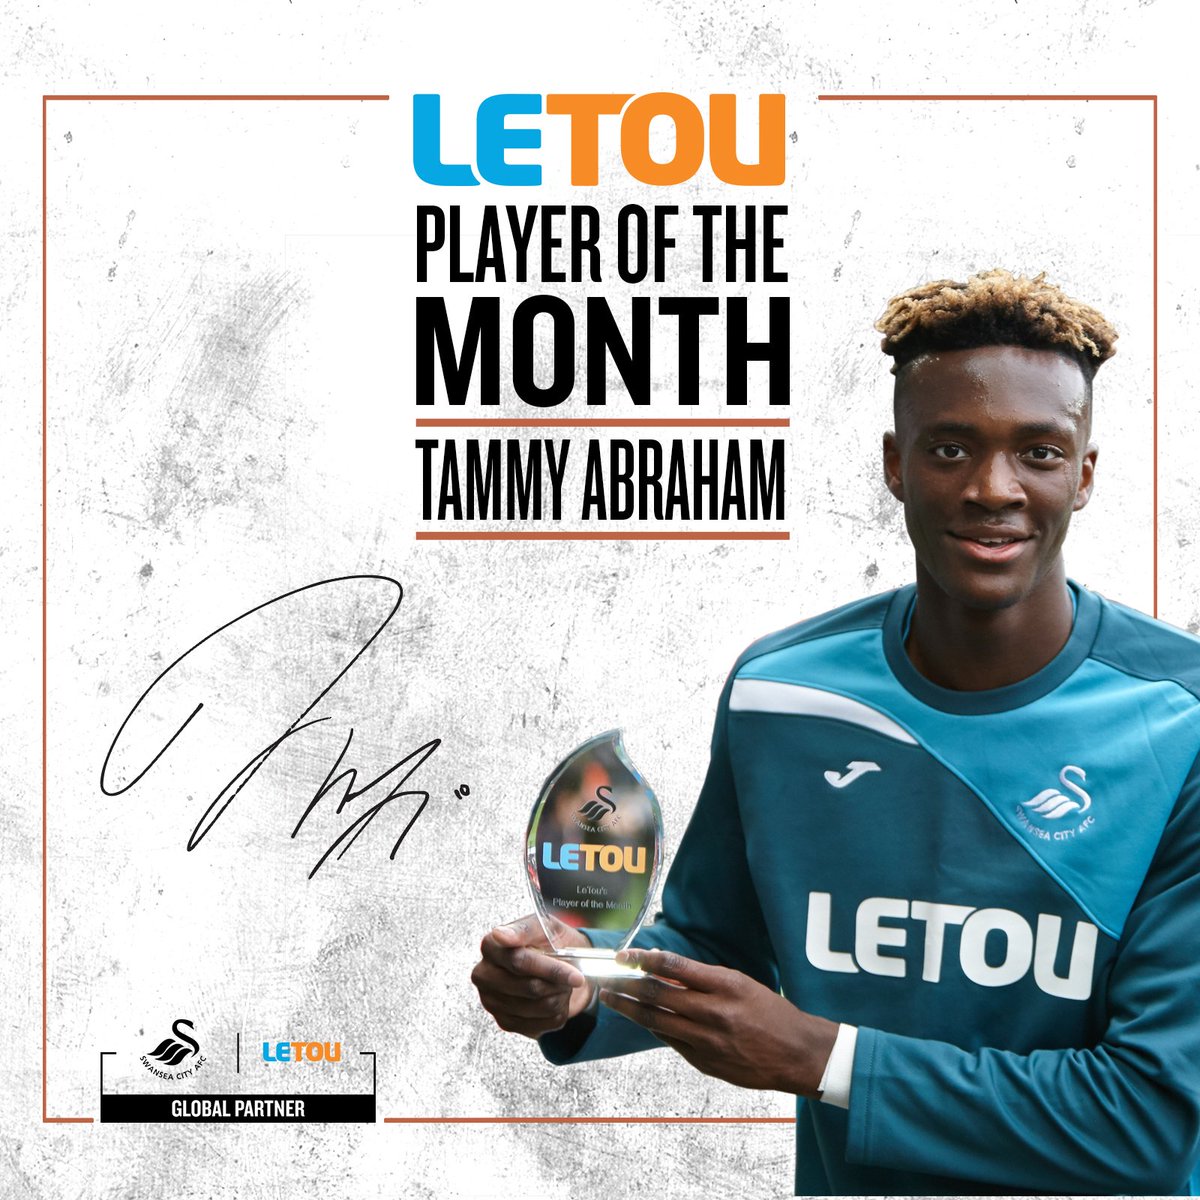 Your @LetouSports Player of the Month for August is…  @tammyabraham 👏  More ➡️ bit.ly/LetouPOTM https://t.co/LrMJmBOLVJ